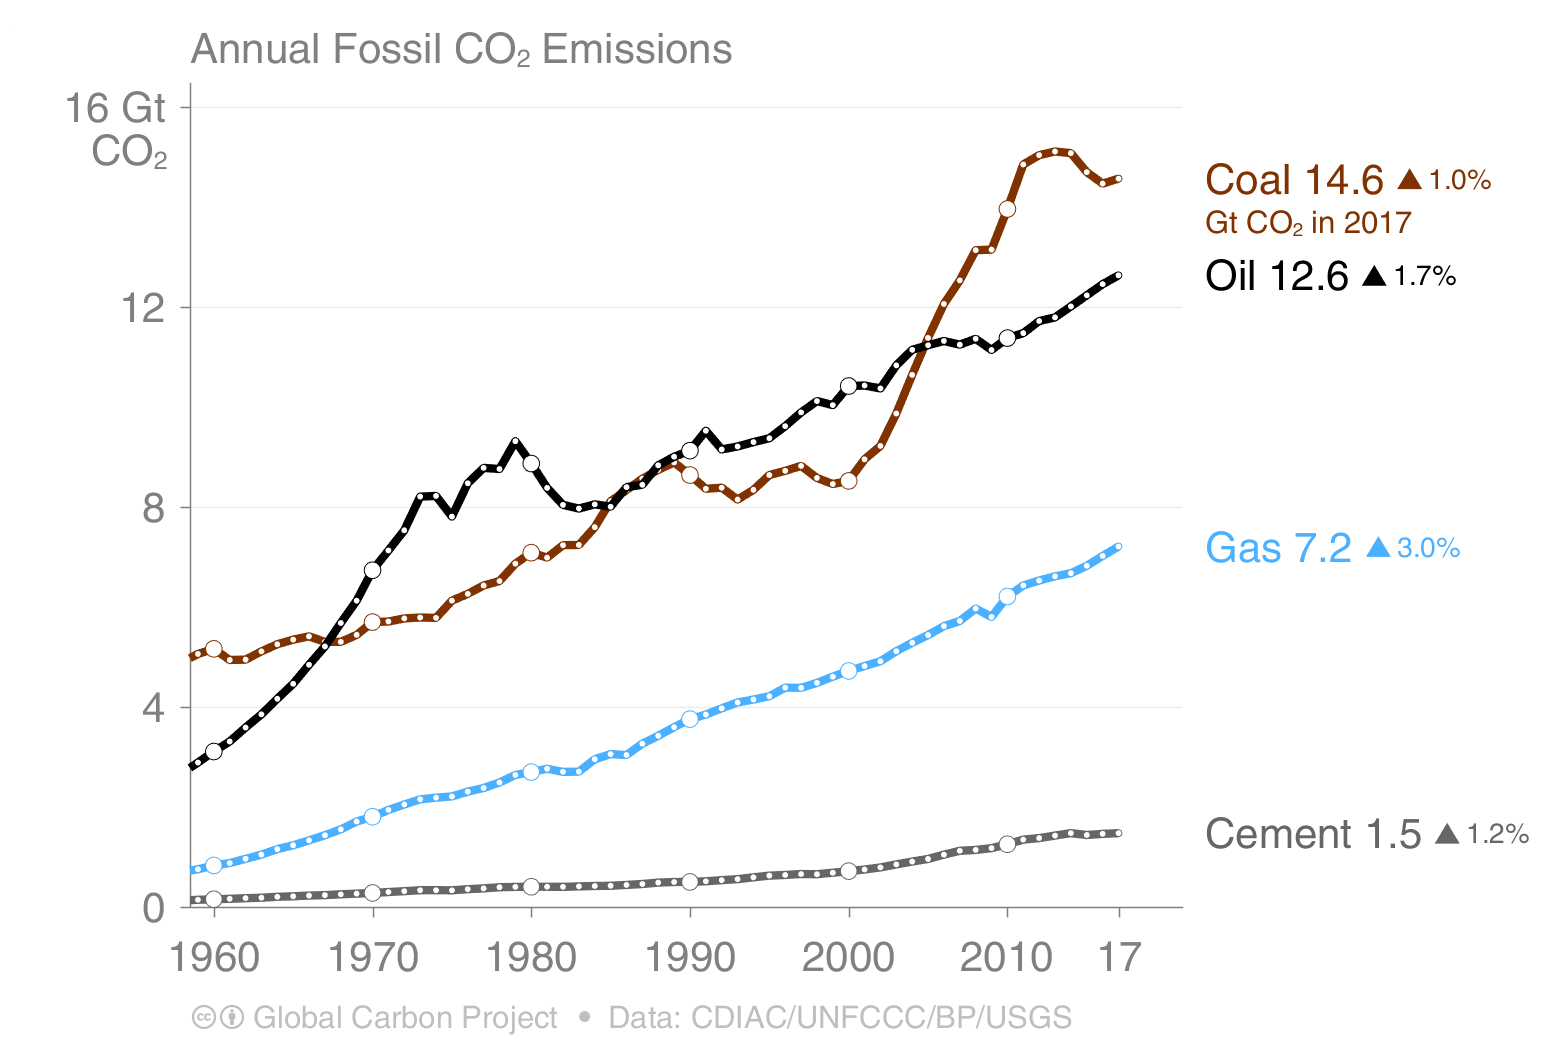 Annual fossil CO2 emissions for coal, oil, gas and cement